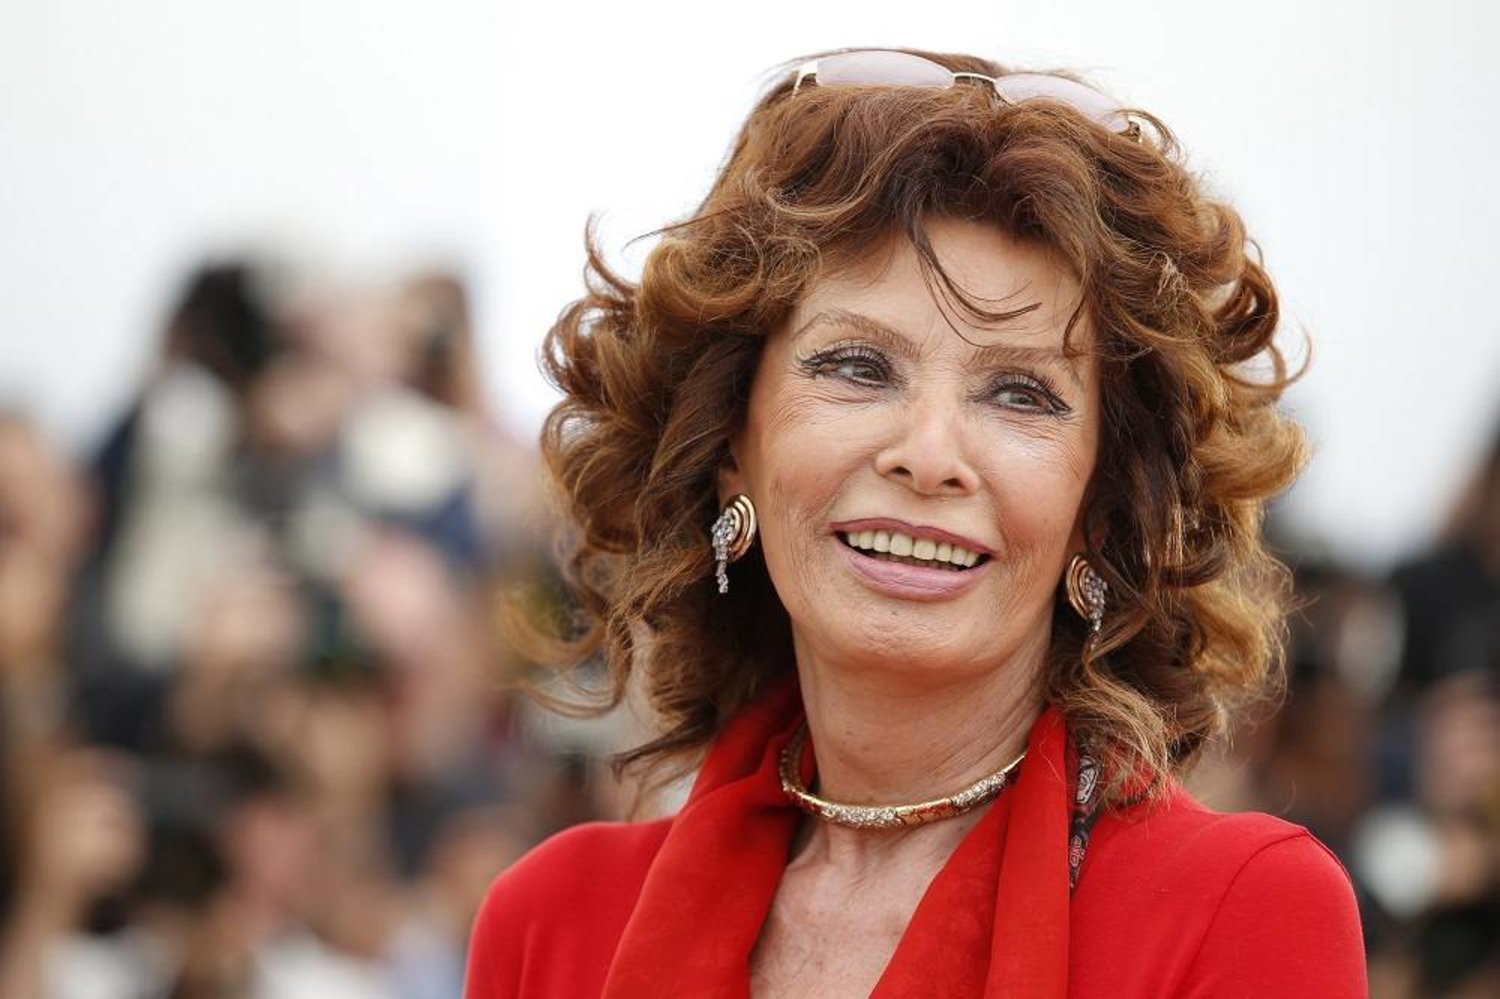 Italian actress Sophia Loren smiles during a photo call for "Human Voice," (Voce Umana) at the 67th international film festival, Cannes, southern France, on May 21, 2014. (AP)